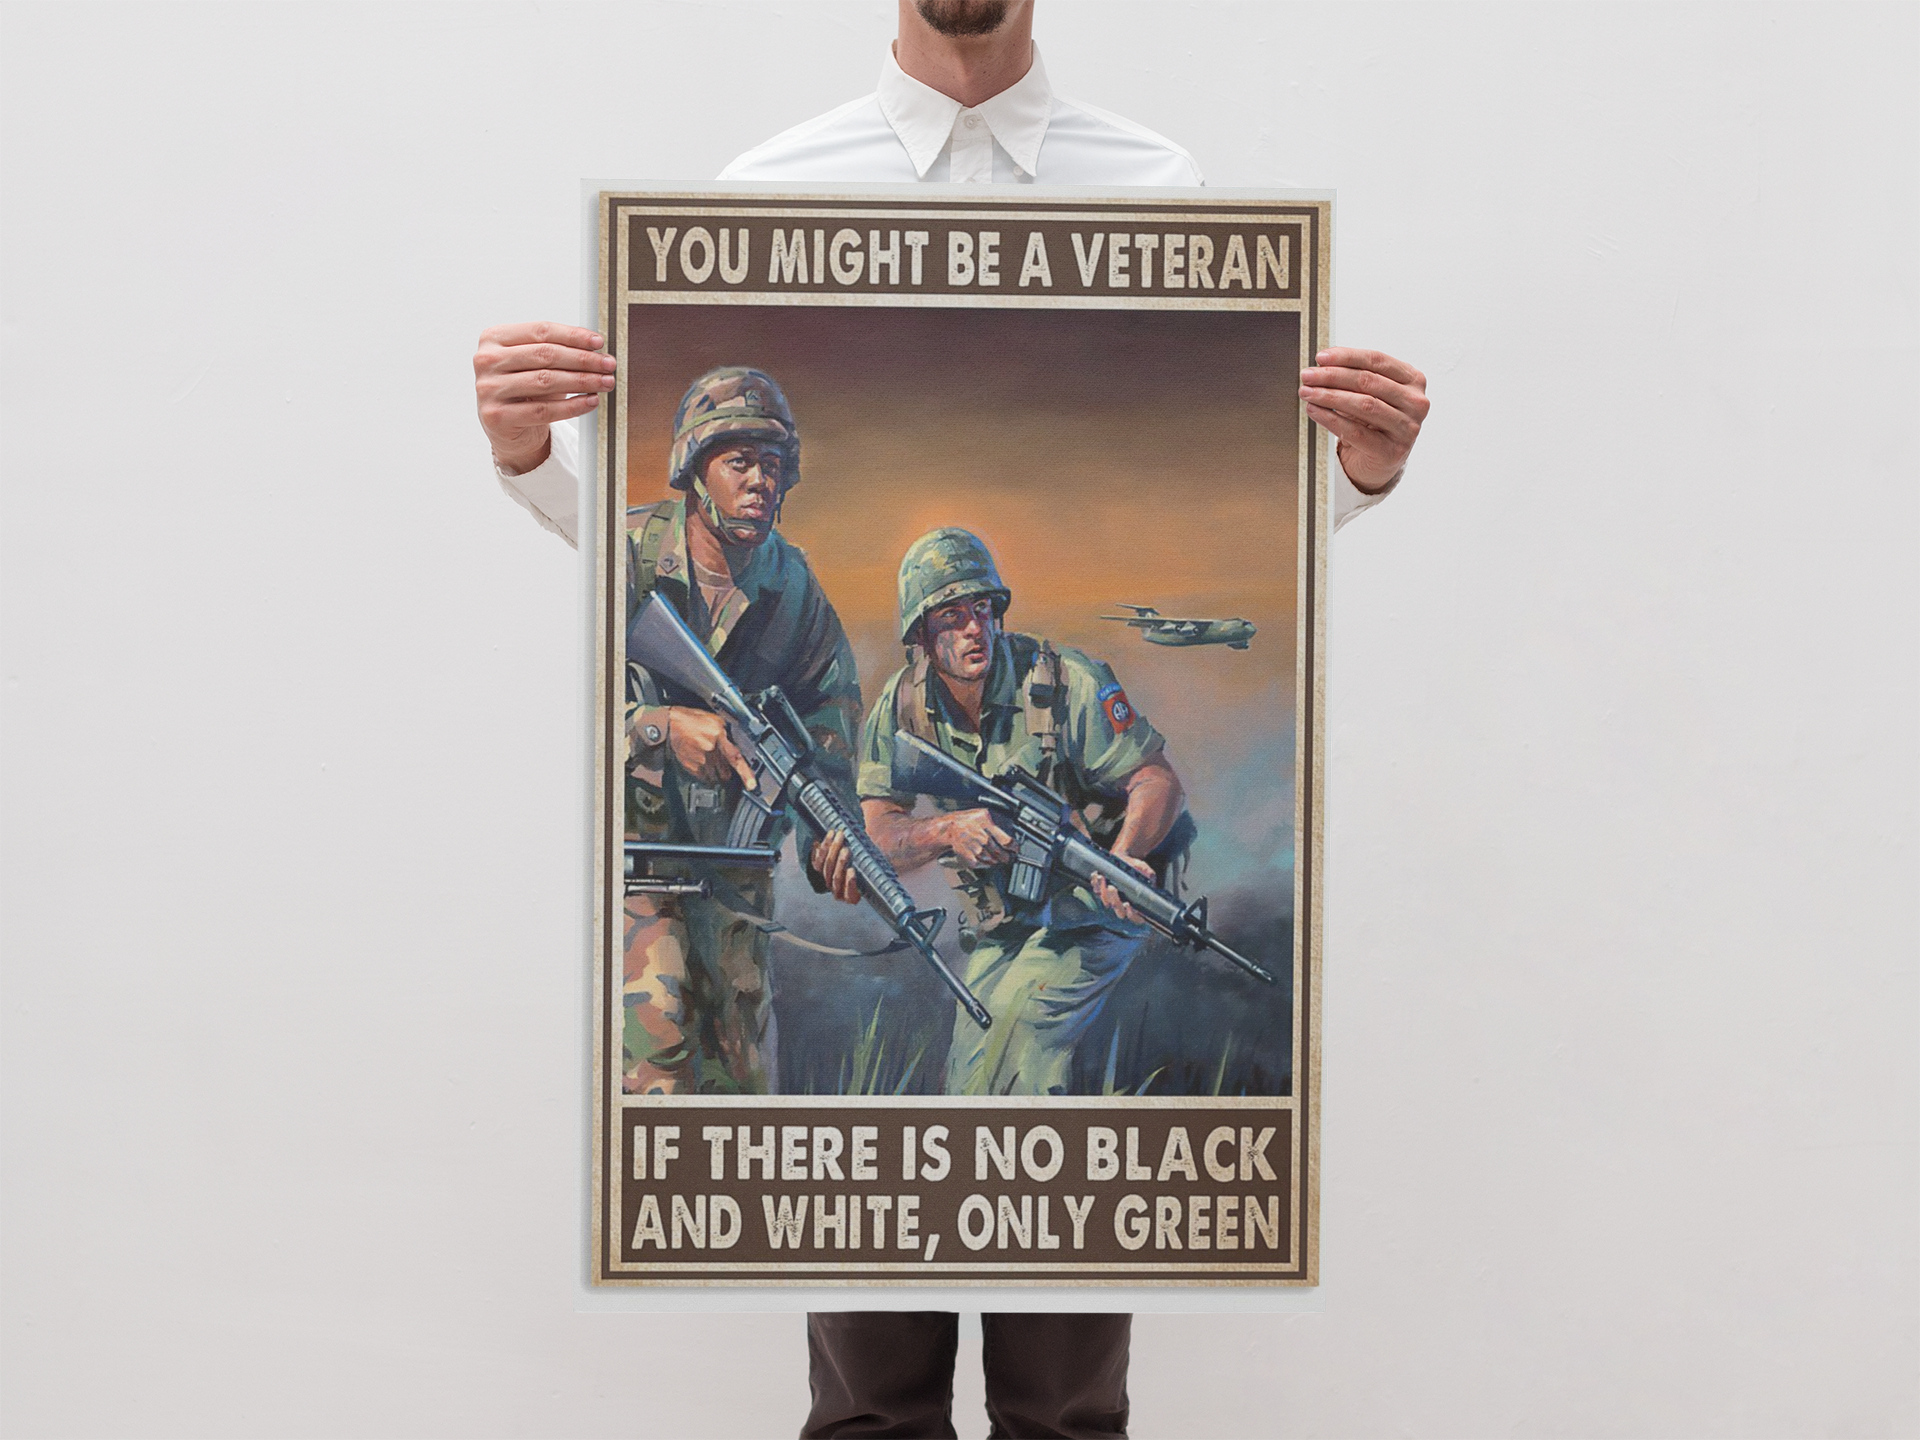 You might be a veteran if there is no black and white only green poster